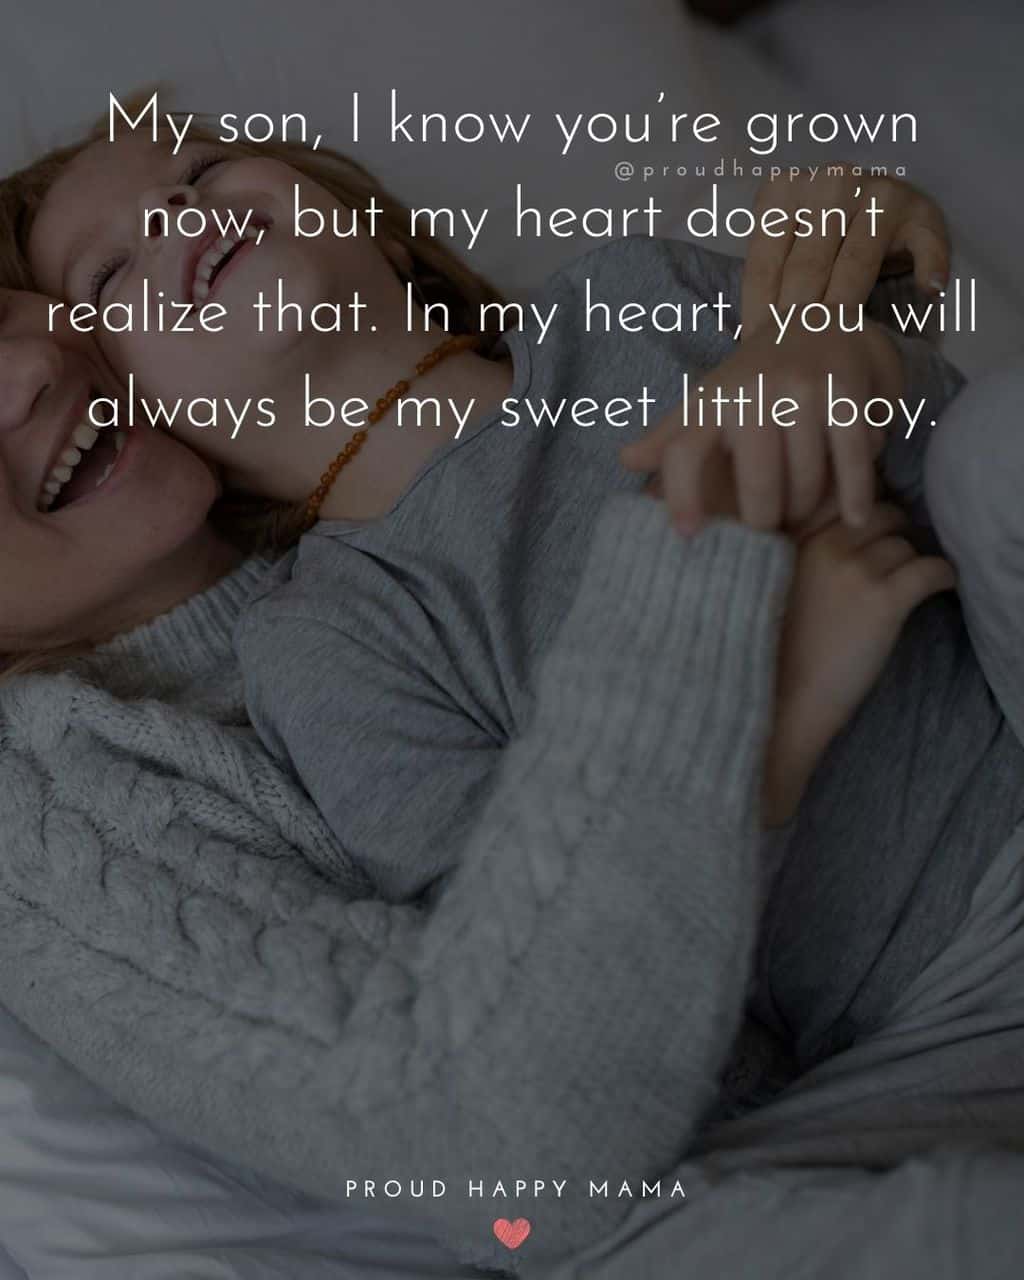 Son Quotes - My son, I know you’re grown now, but my heart doesn’t realize that. In my heart, you will always be my sweet